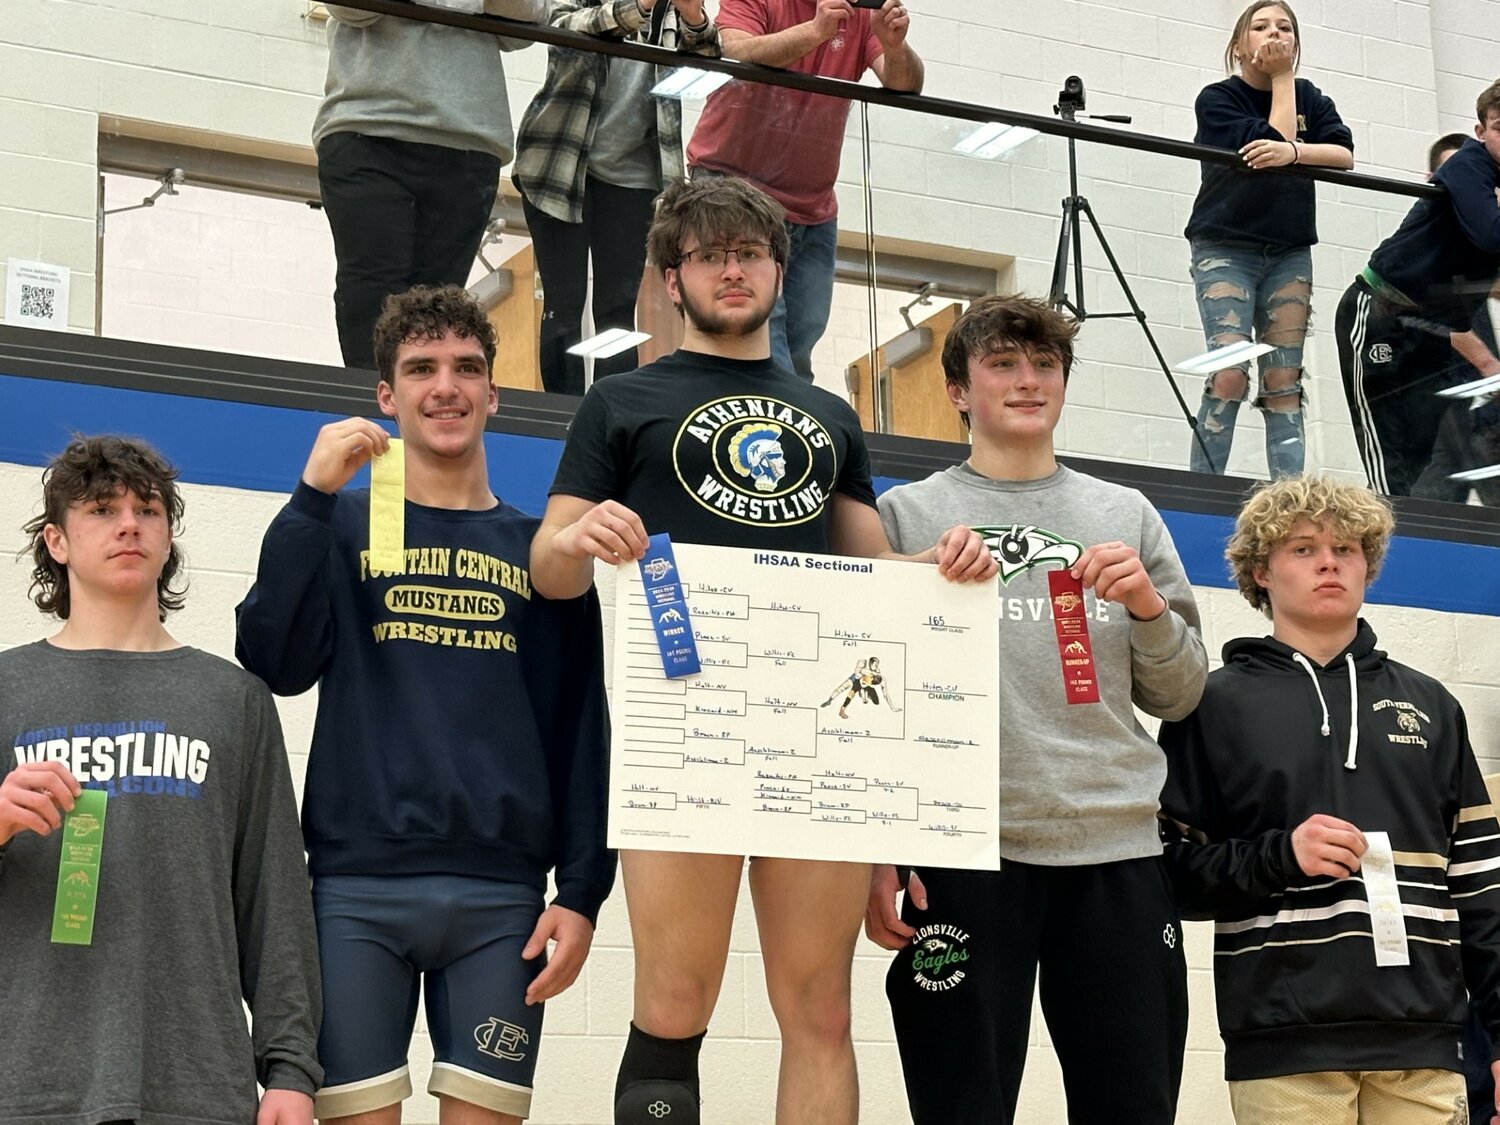 Crawfordsville's Braeden Hites continued his perfect season at 30-0 on his way to the sectional title at 165